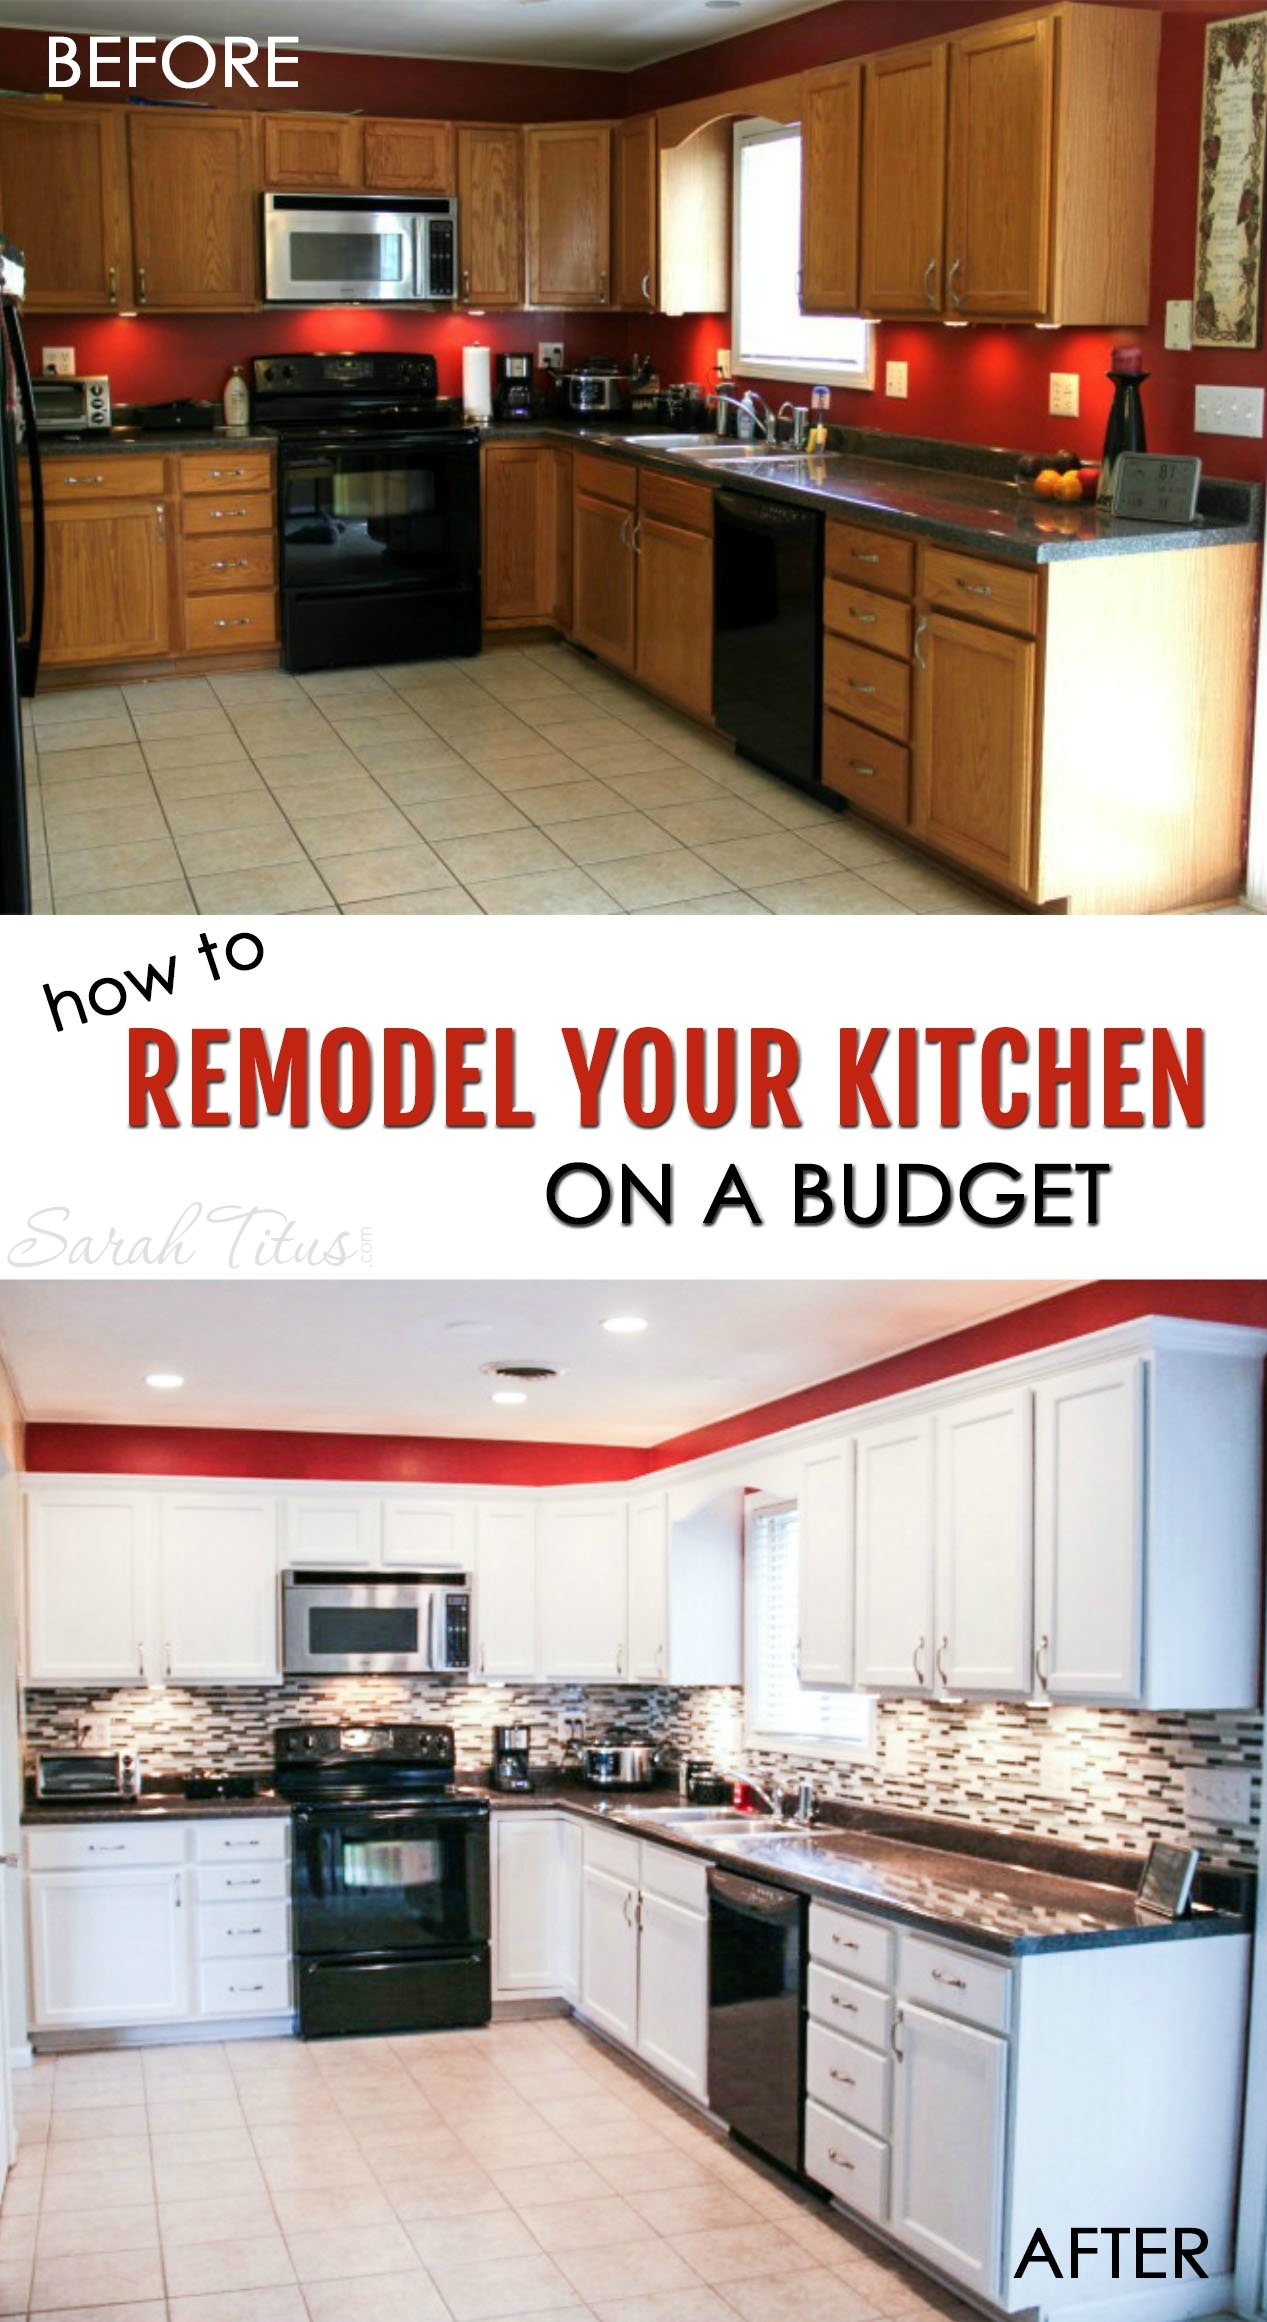 How To Remodel Your Kitchen On A Budget - Sarah Titus